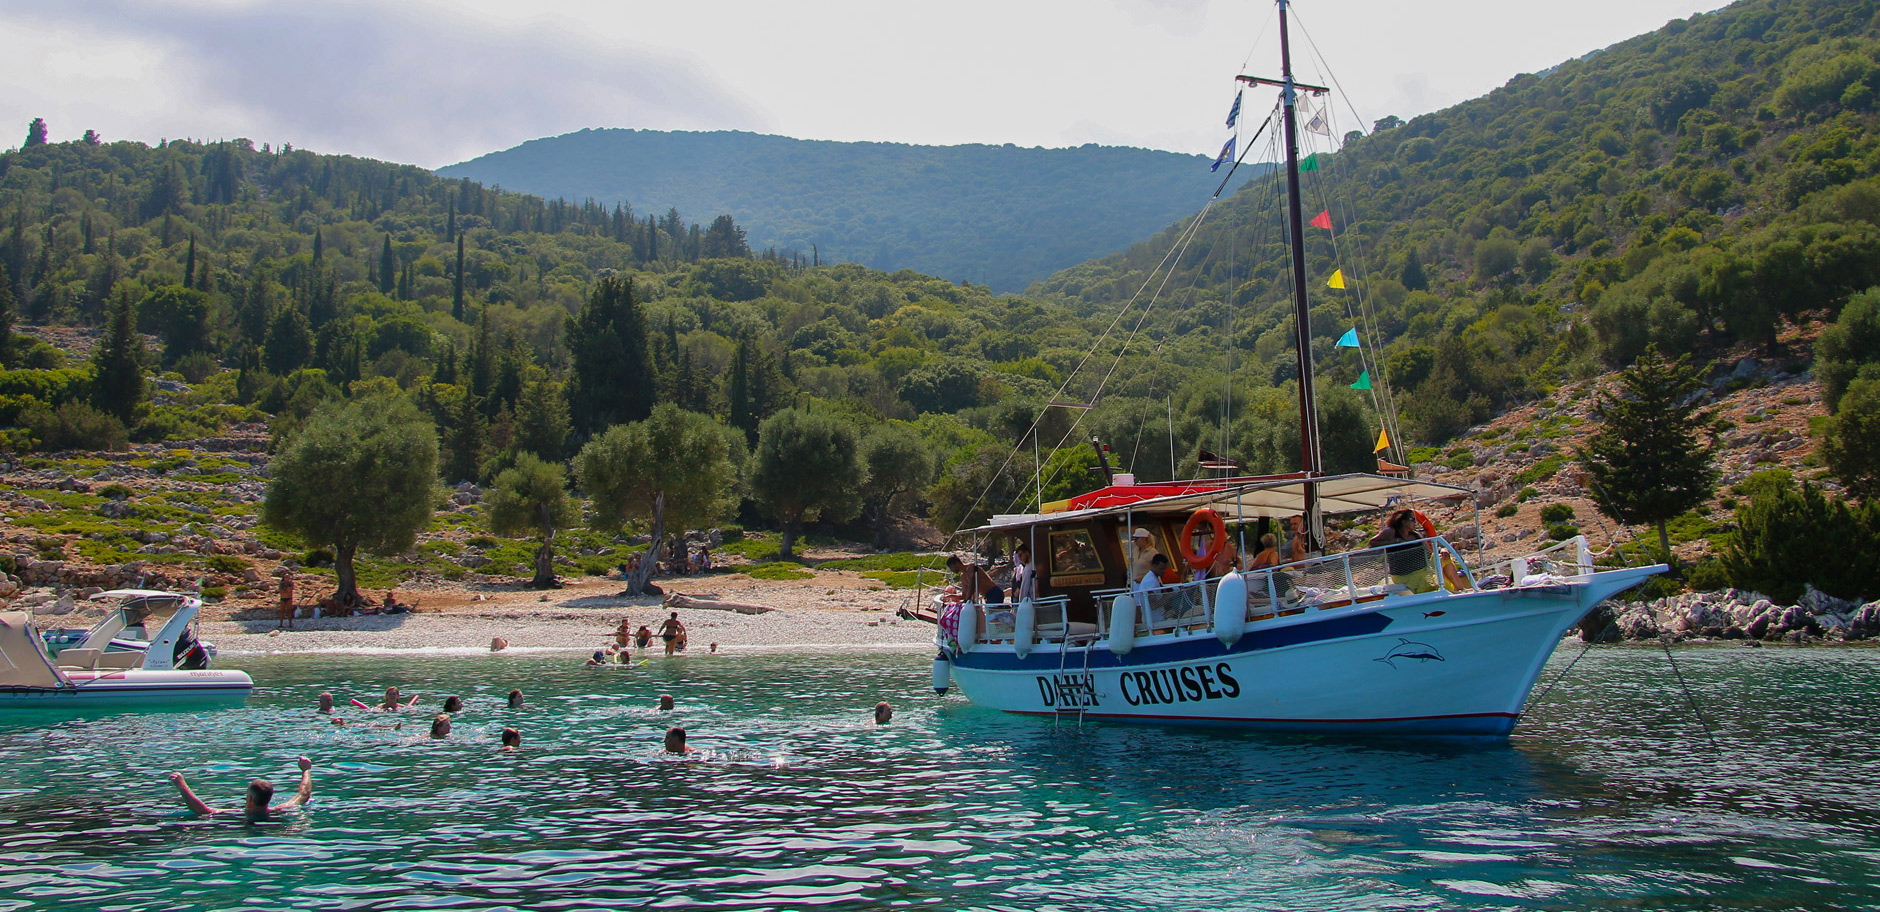 Fiscardo Cruises Kefalonia | Kefalonia Daily Cruises from Fiscardo to Ithaca with the traditional boat “Odysseas”. Kefalonia Cruises - Daily Cruises to Ithaca - Kefalonia day cruises - Kefalonia private cruises - Fiscardo Daily Cruises to Ithaca - Fiscardo Private Cruises